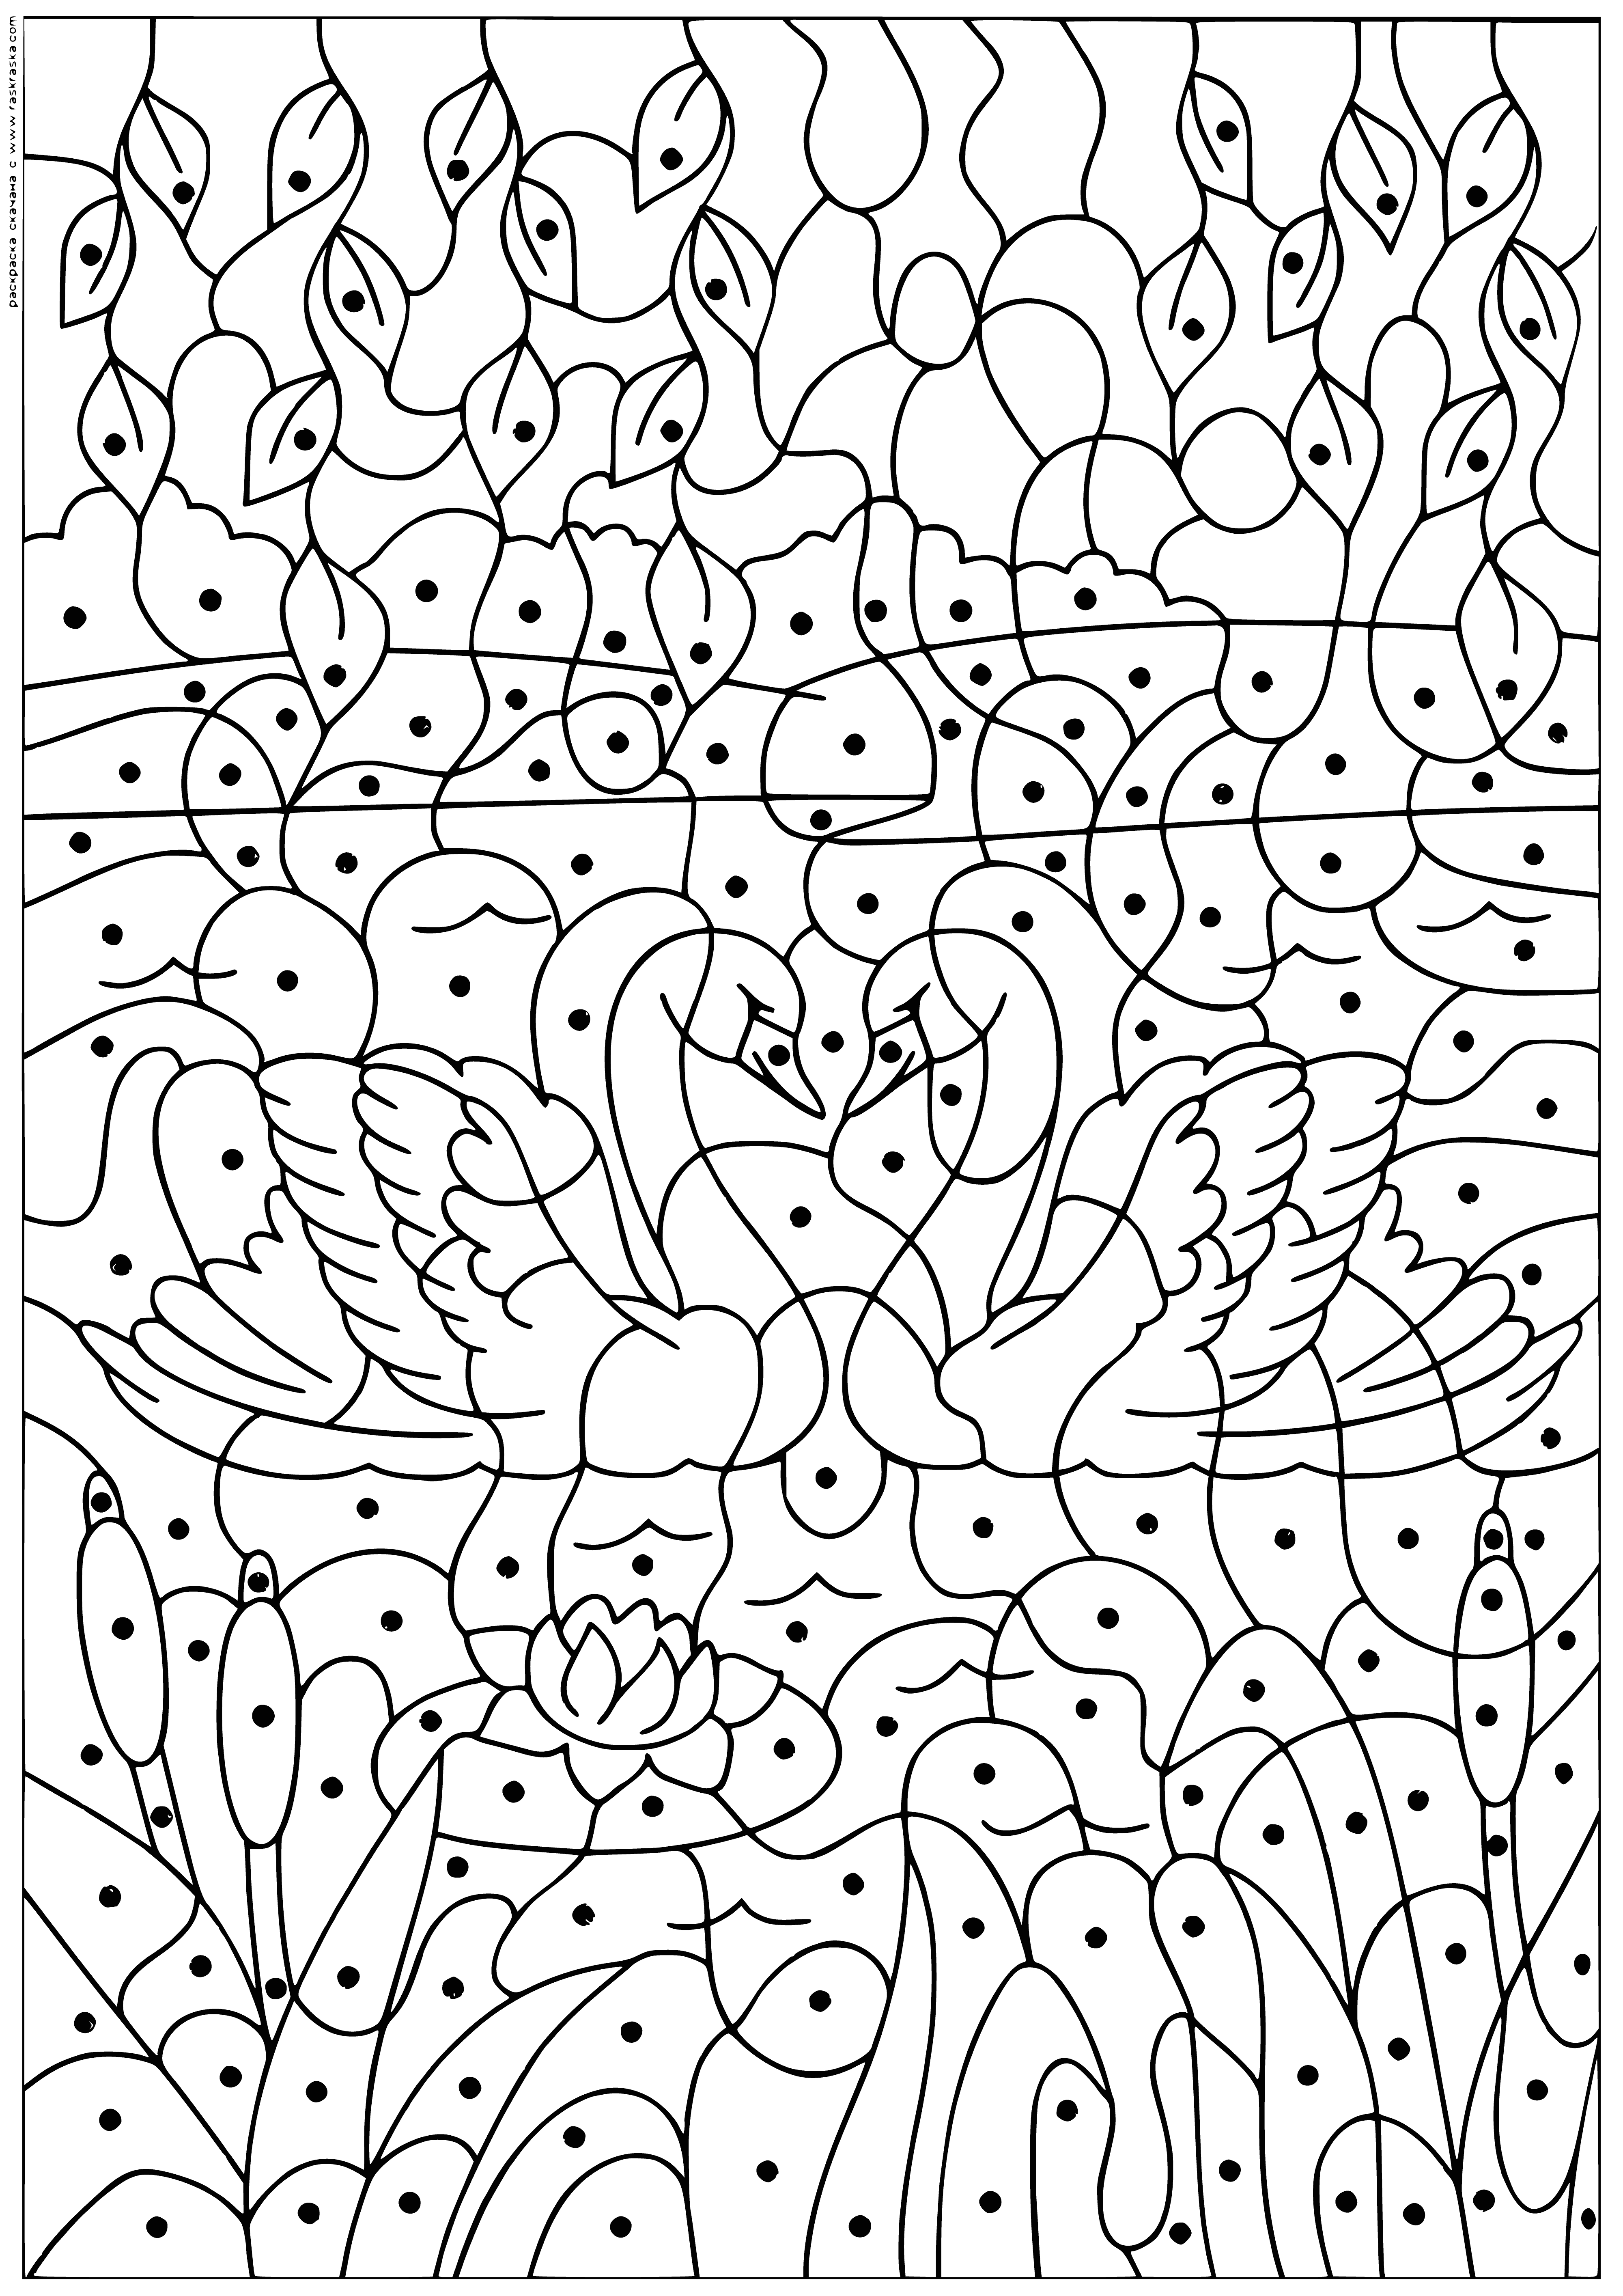 coloring page: A graceful swan spreads its wings, ready to take off on a calm blue pond.